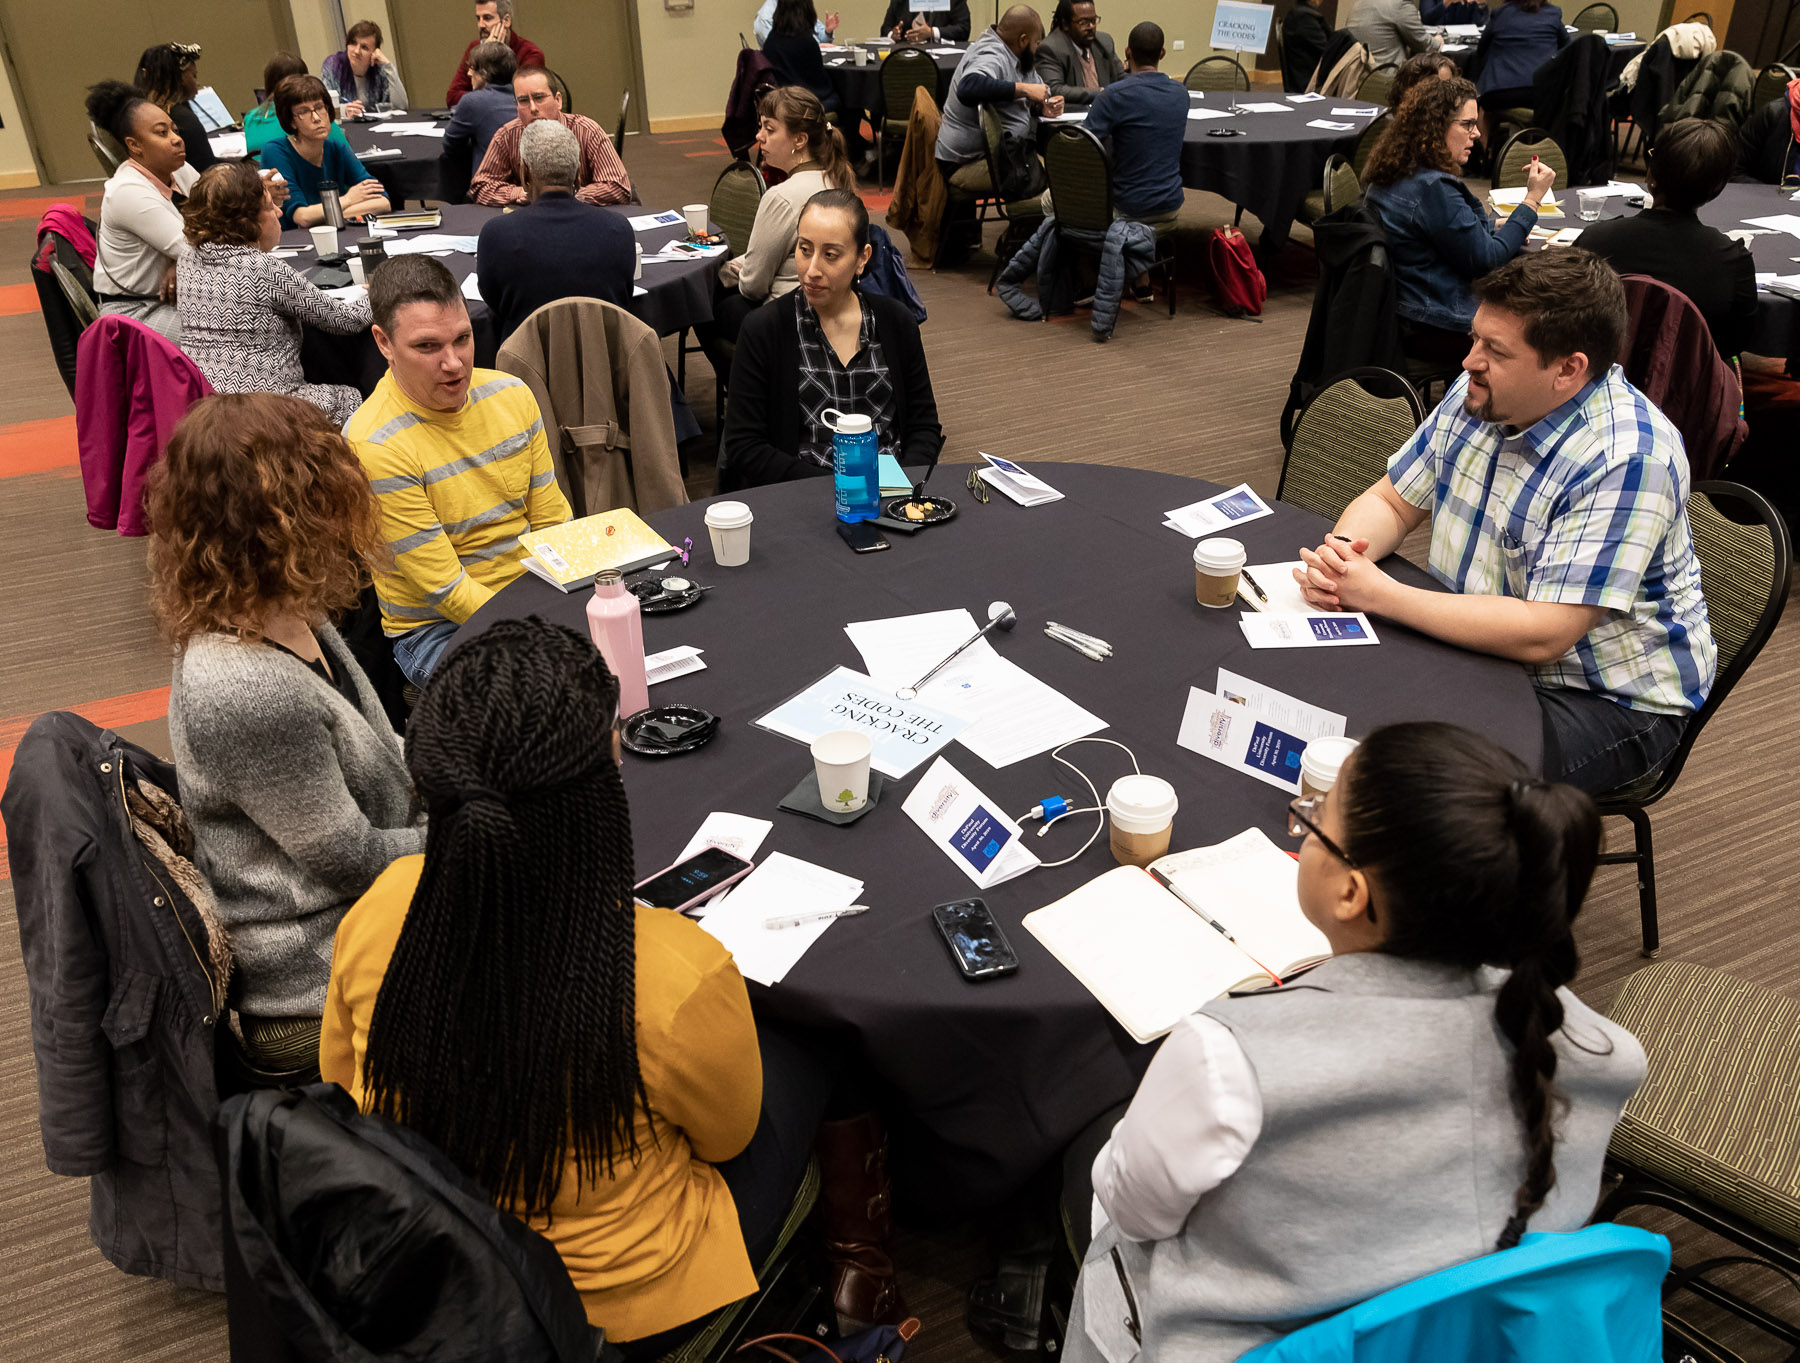 Groups of faculty, staff and students took time to talk about diversity topics during the event in the Lincoln Park Student Center. (DePaul University/Jeff Carrion)